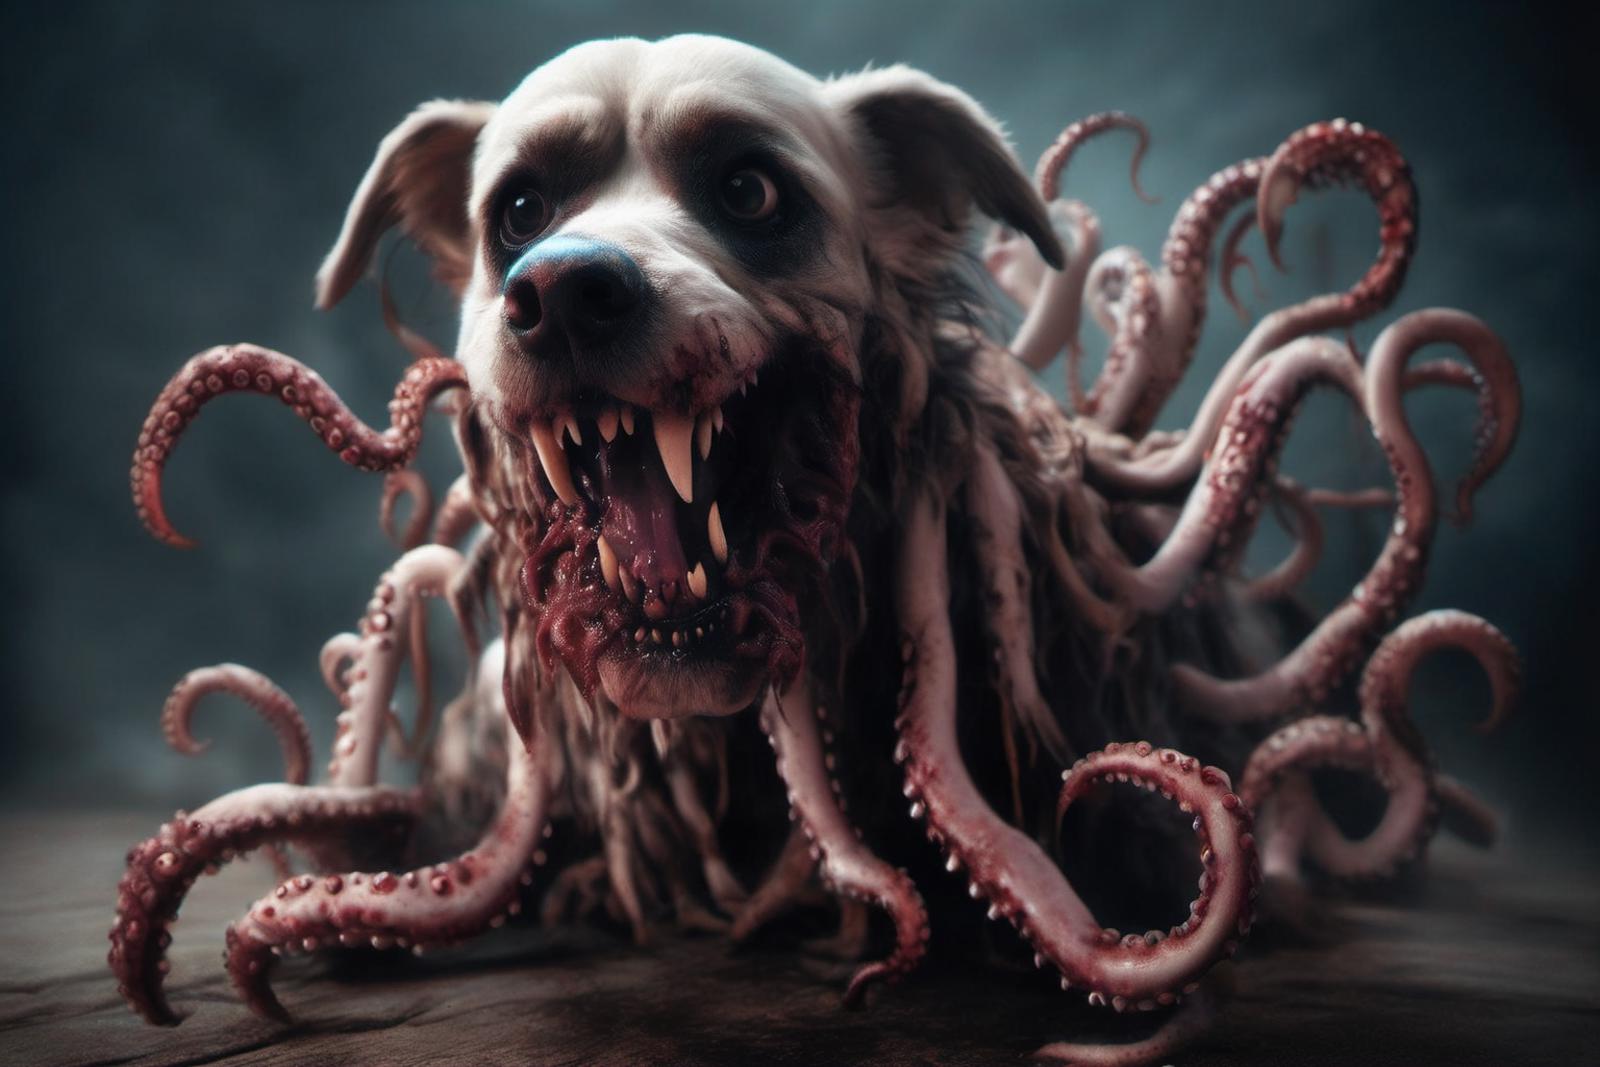 A dog covered in fake blood and teeth, with an octopus on its head.